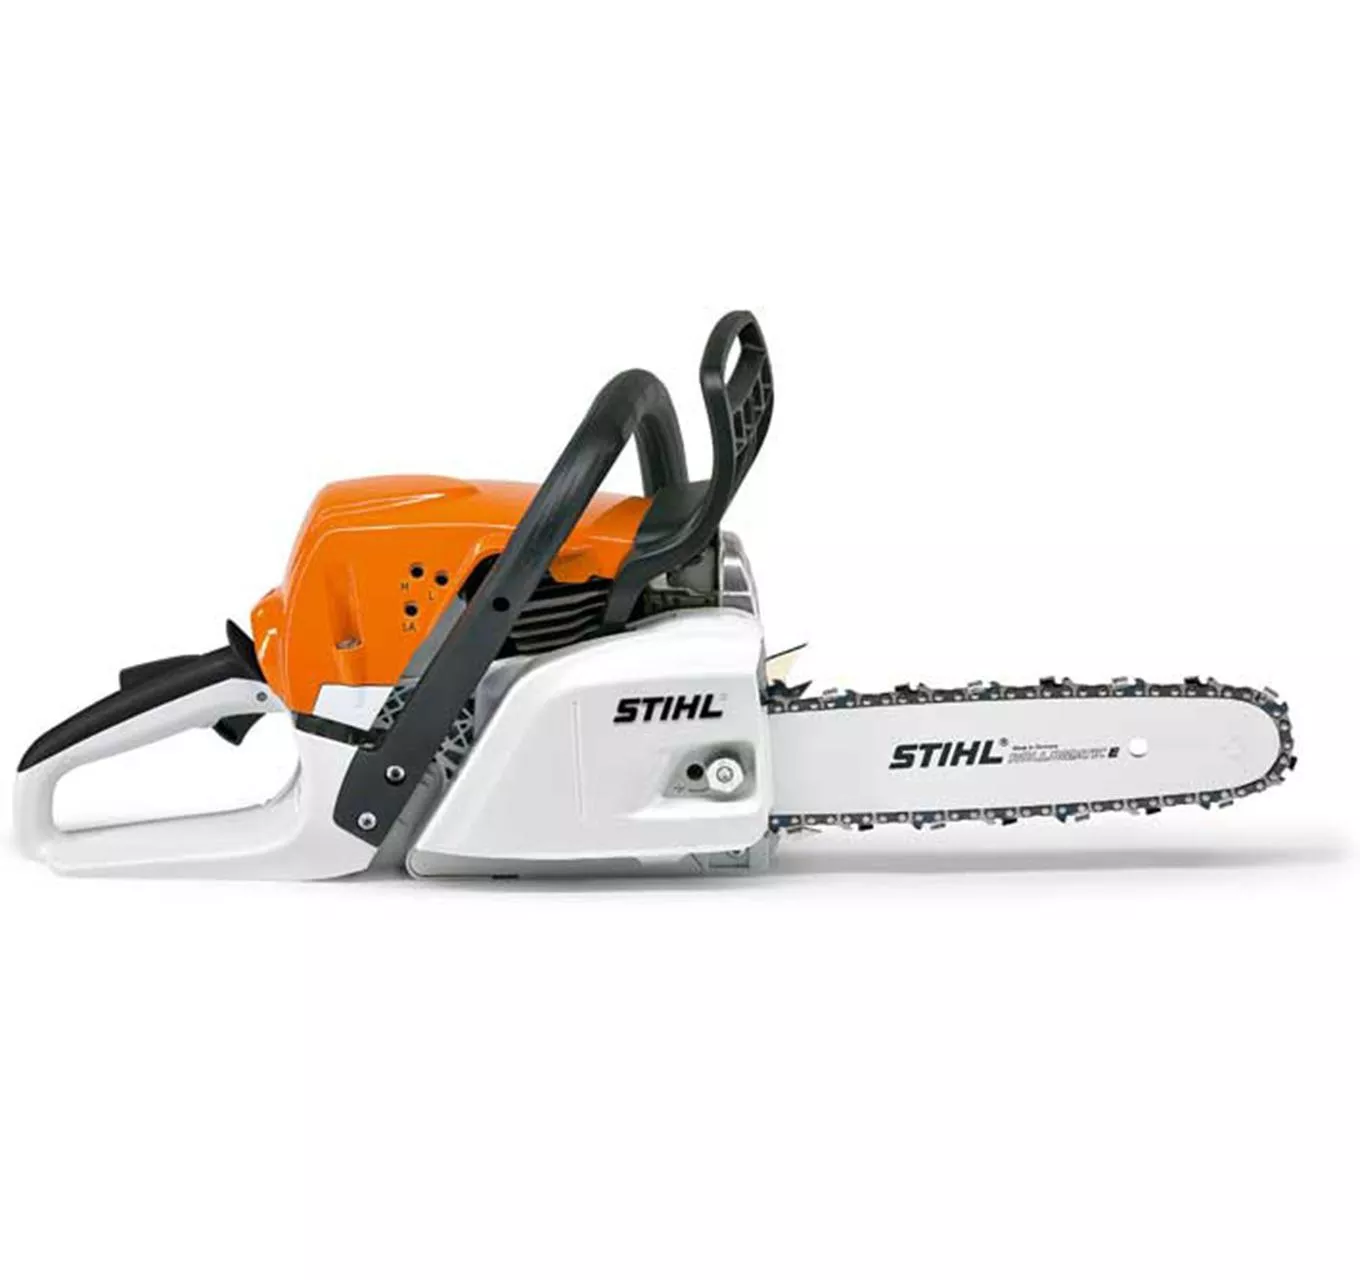 MS 251 Chainsaw 16"